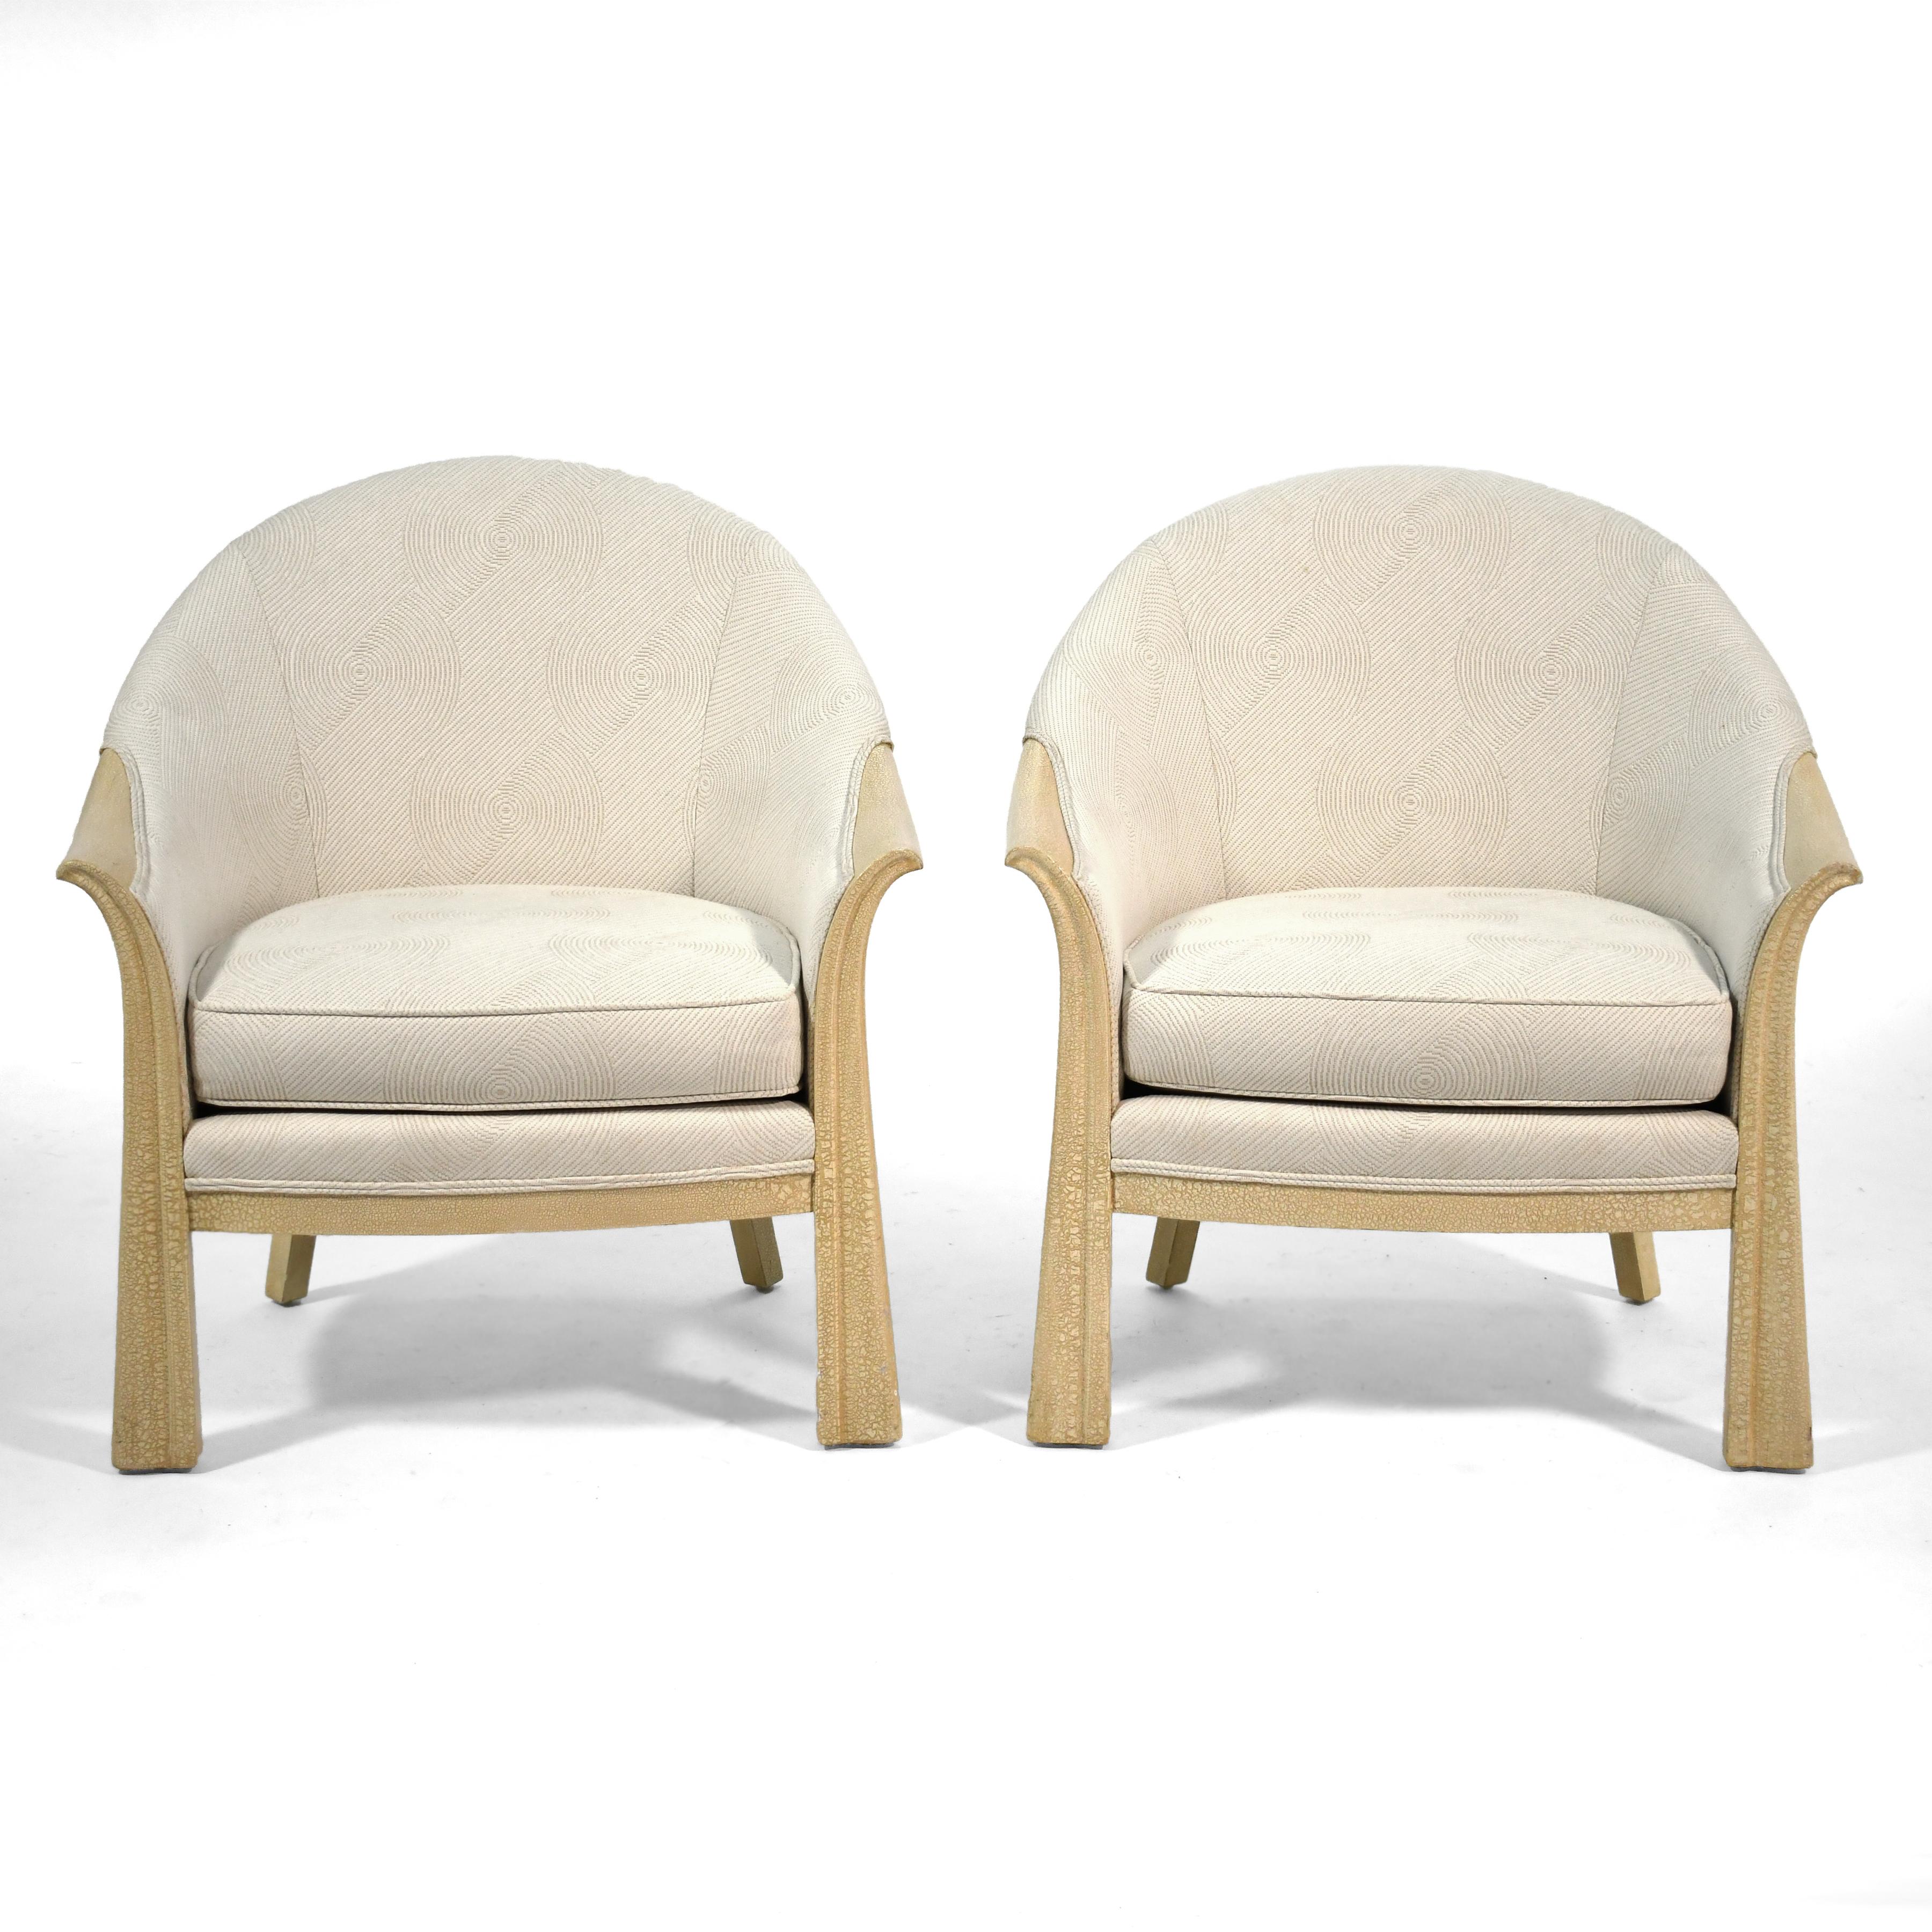 These two lovely lounge chairs are reproductions of a Pierre Chareau design. They were commissioned by important Chicago interior designer Roy Klipp (1923-2010) and fabricated by Interior Crafts. They have an eggshell finish to the frames and are